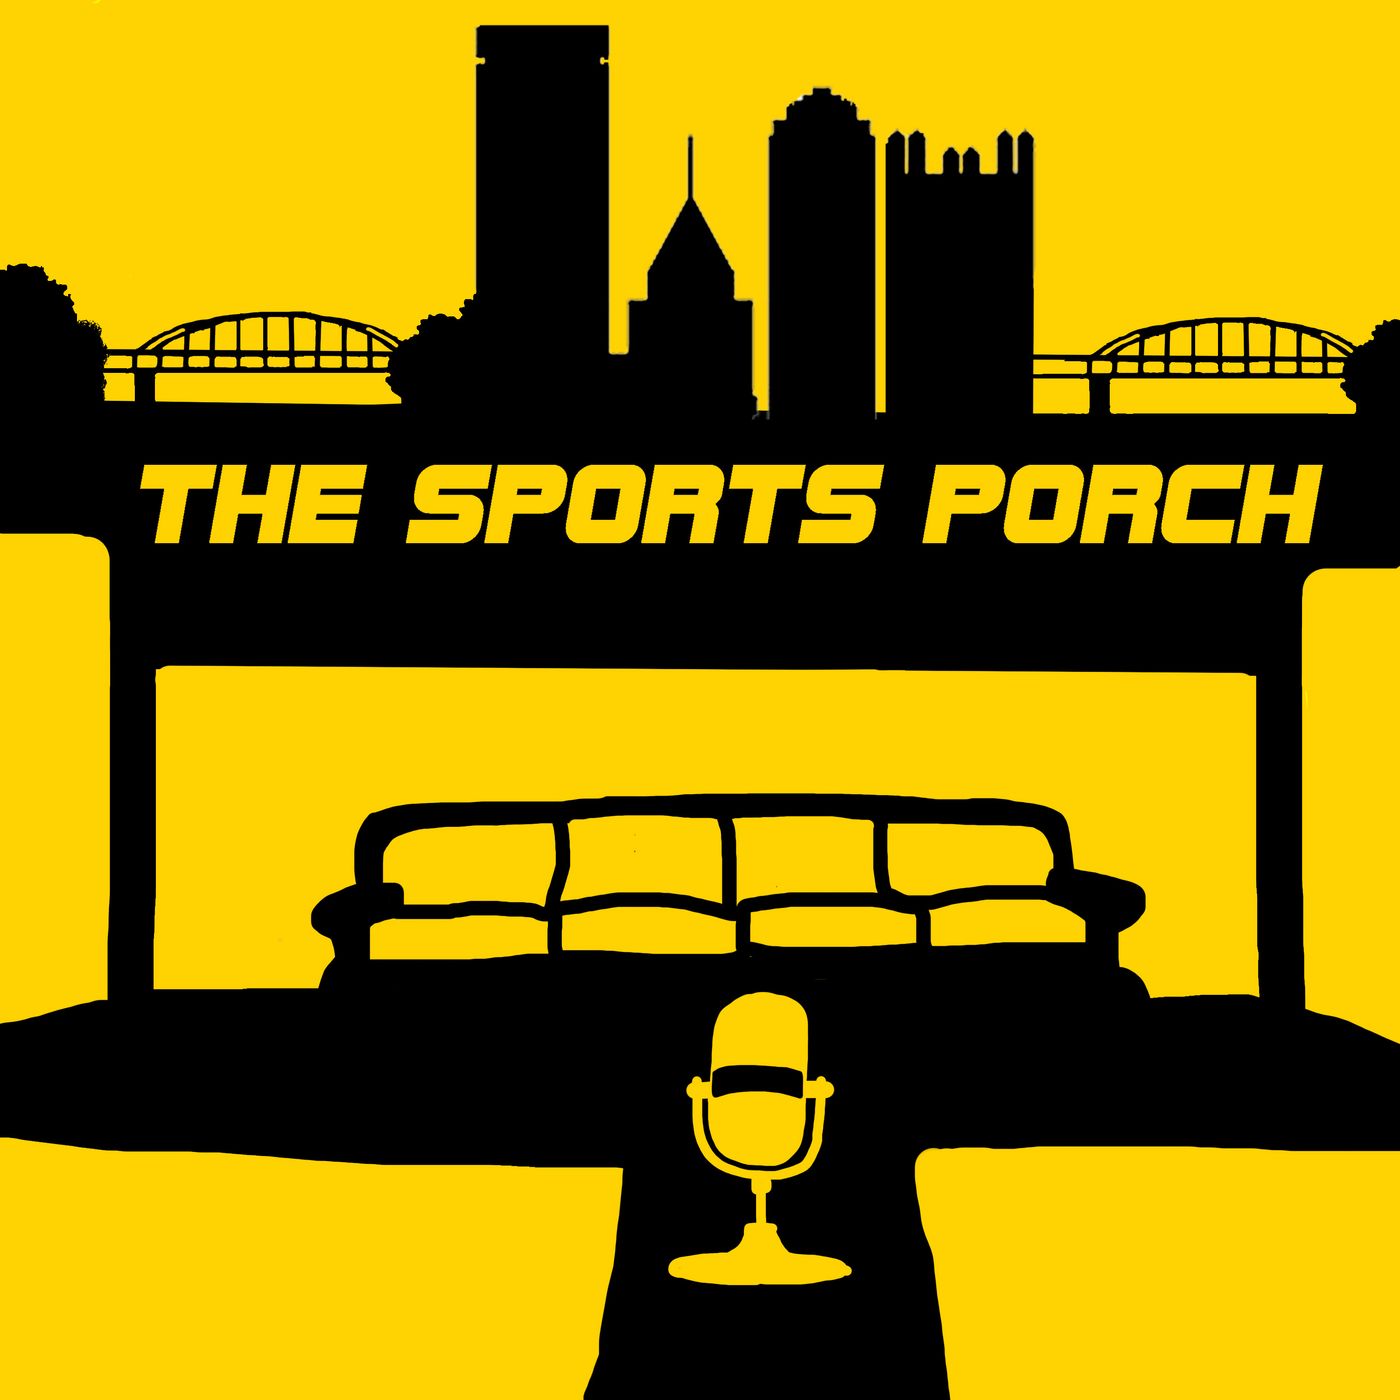 The Porch Is LIve - Does it matter if we have a losing season?